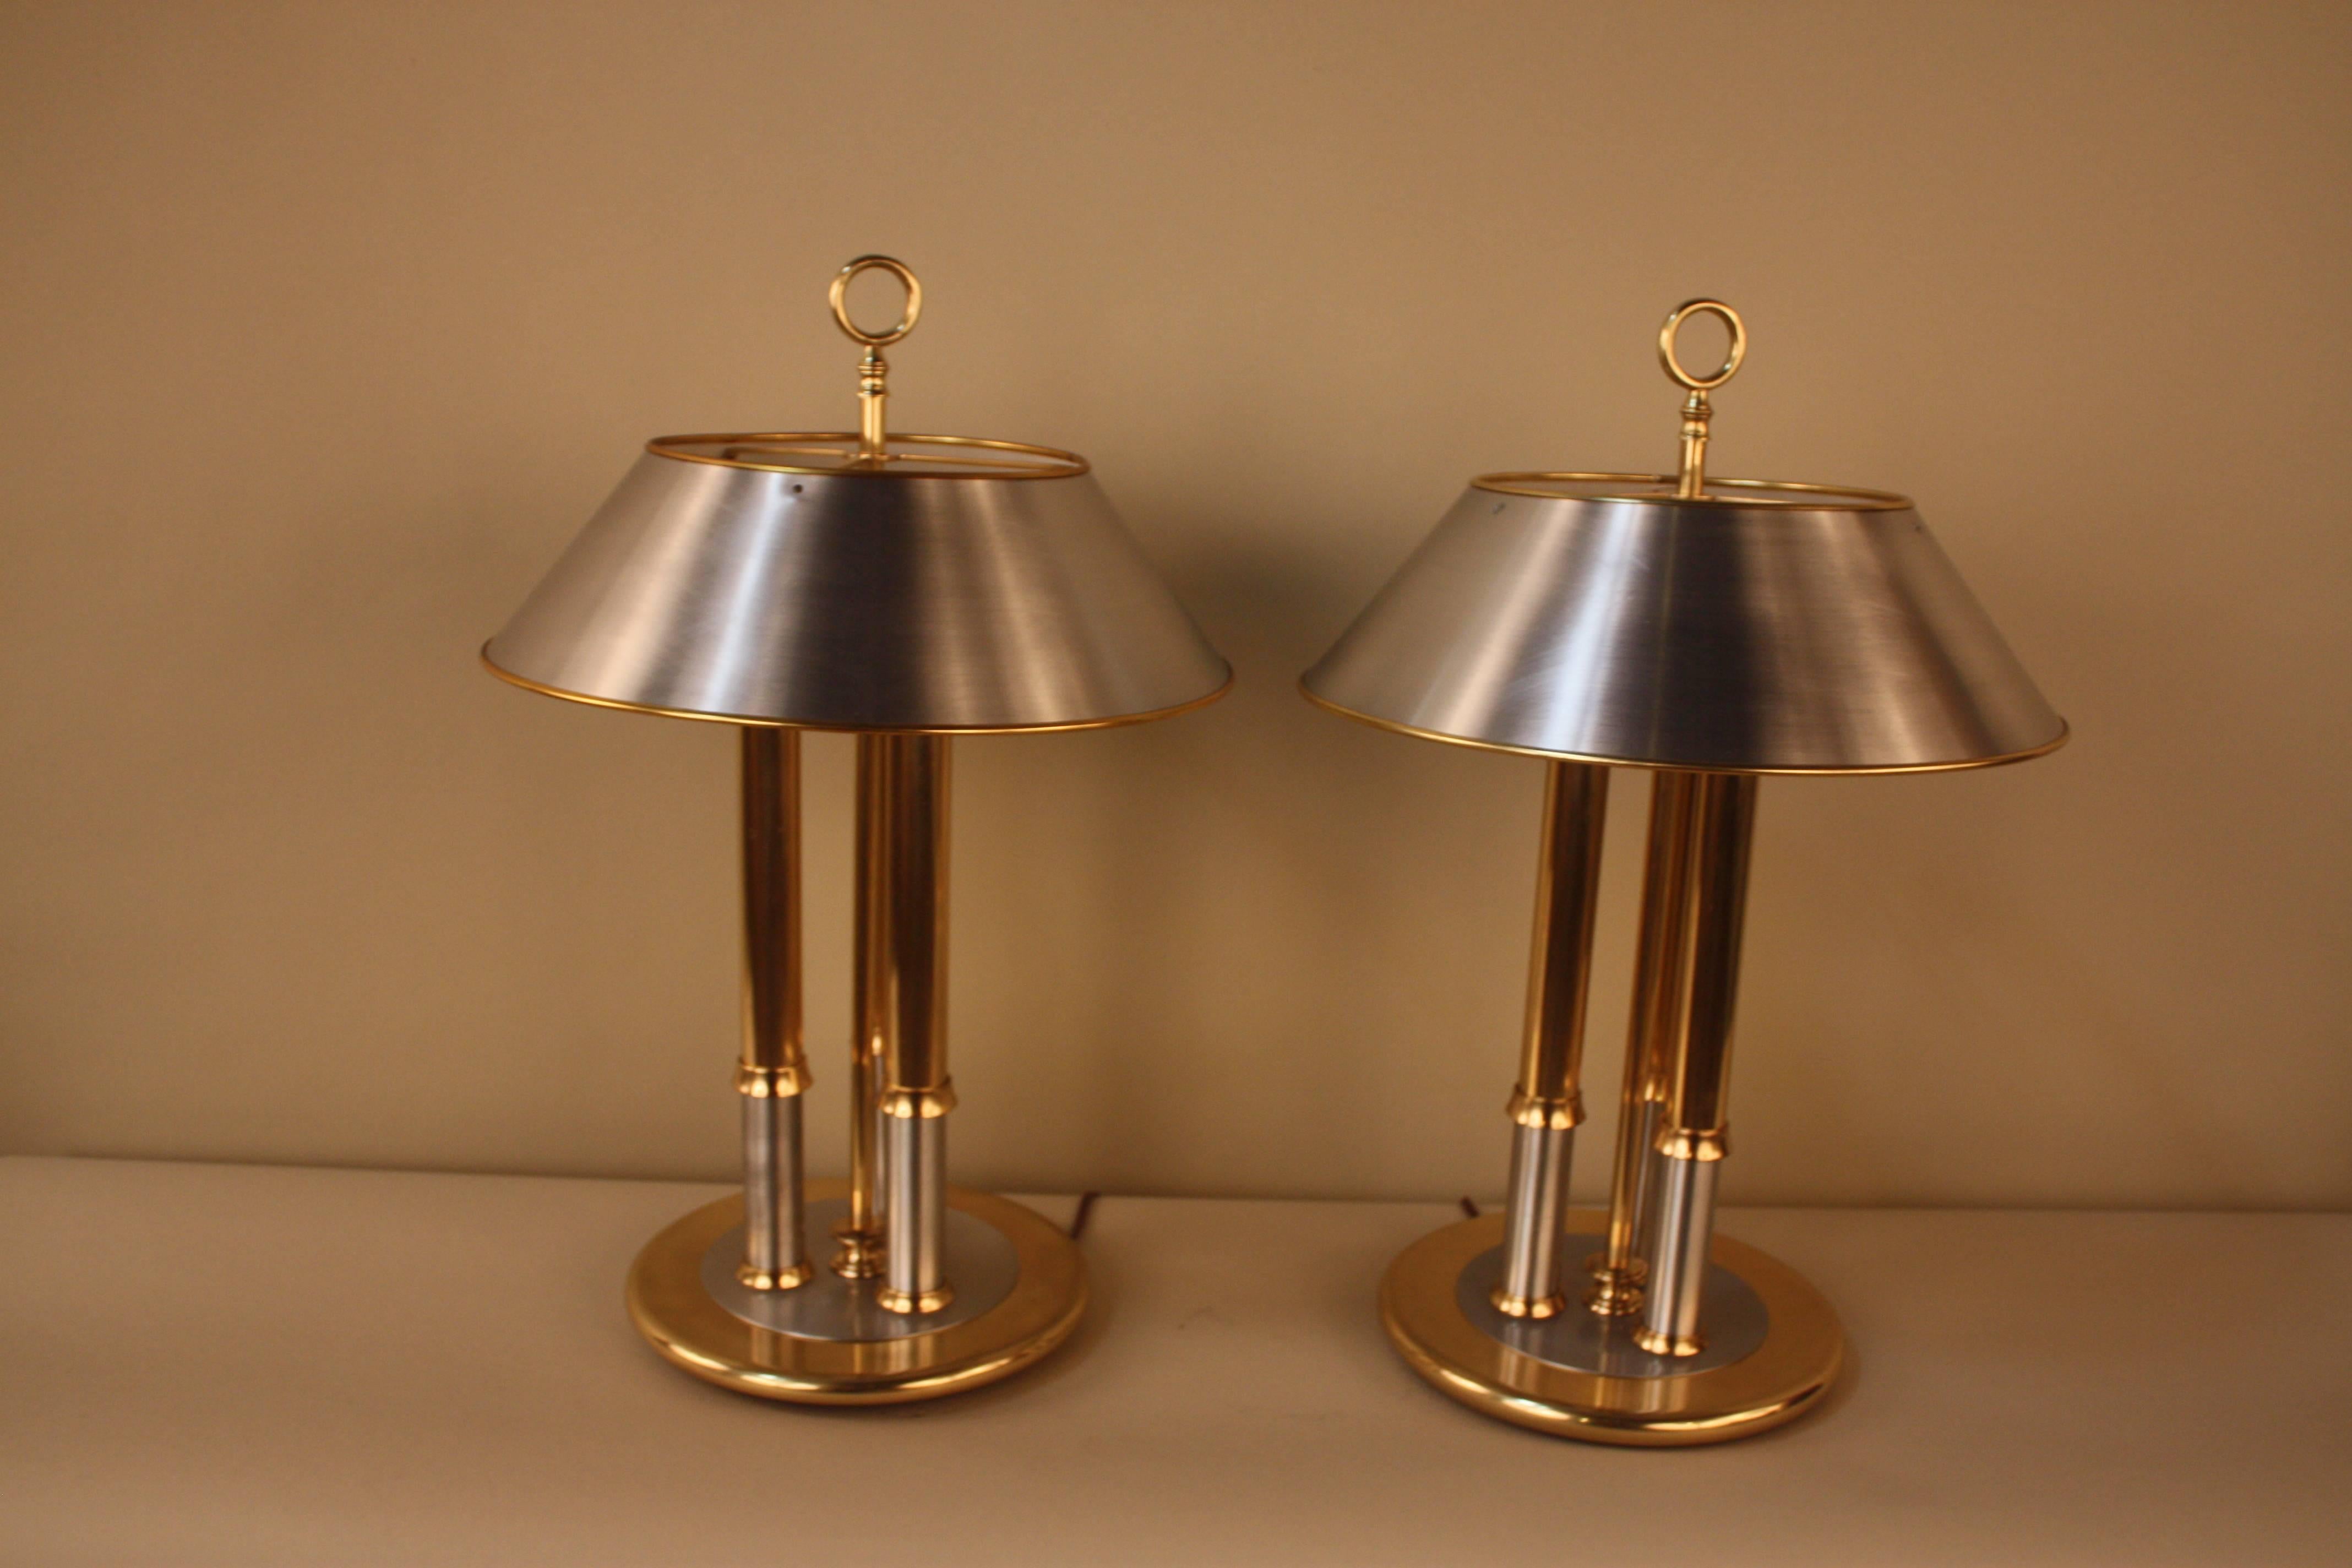 Two-tone color Desk lamps, modern lamp in classical design in brushed aluminium and bronze.